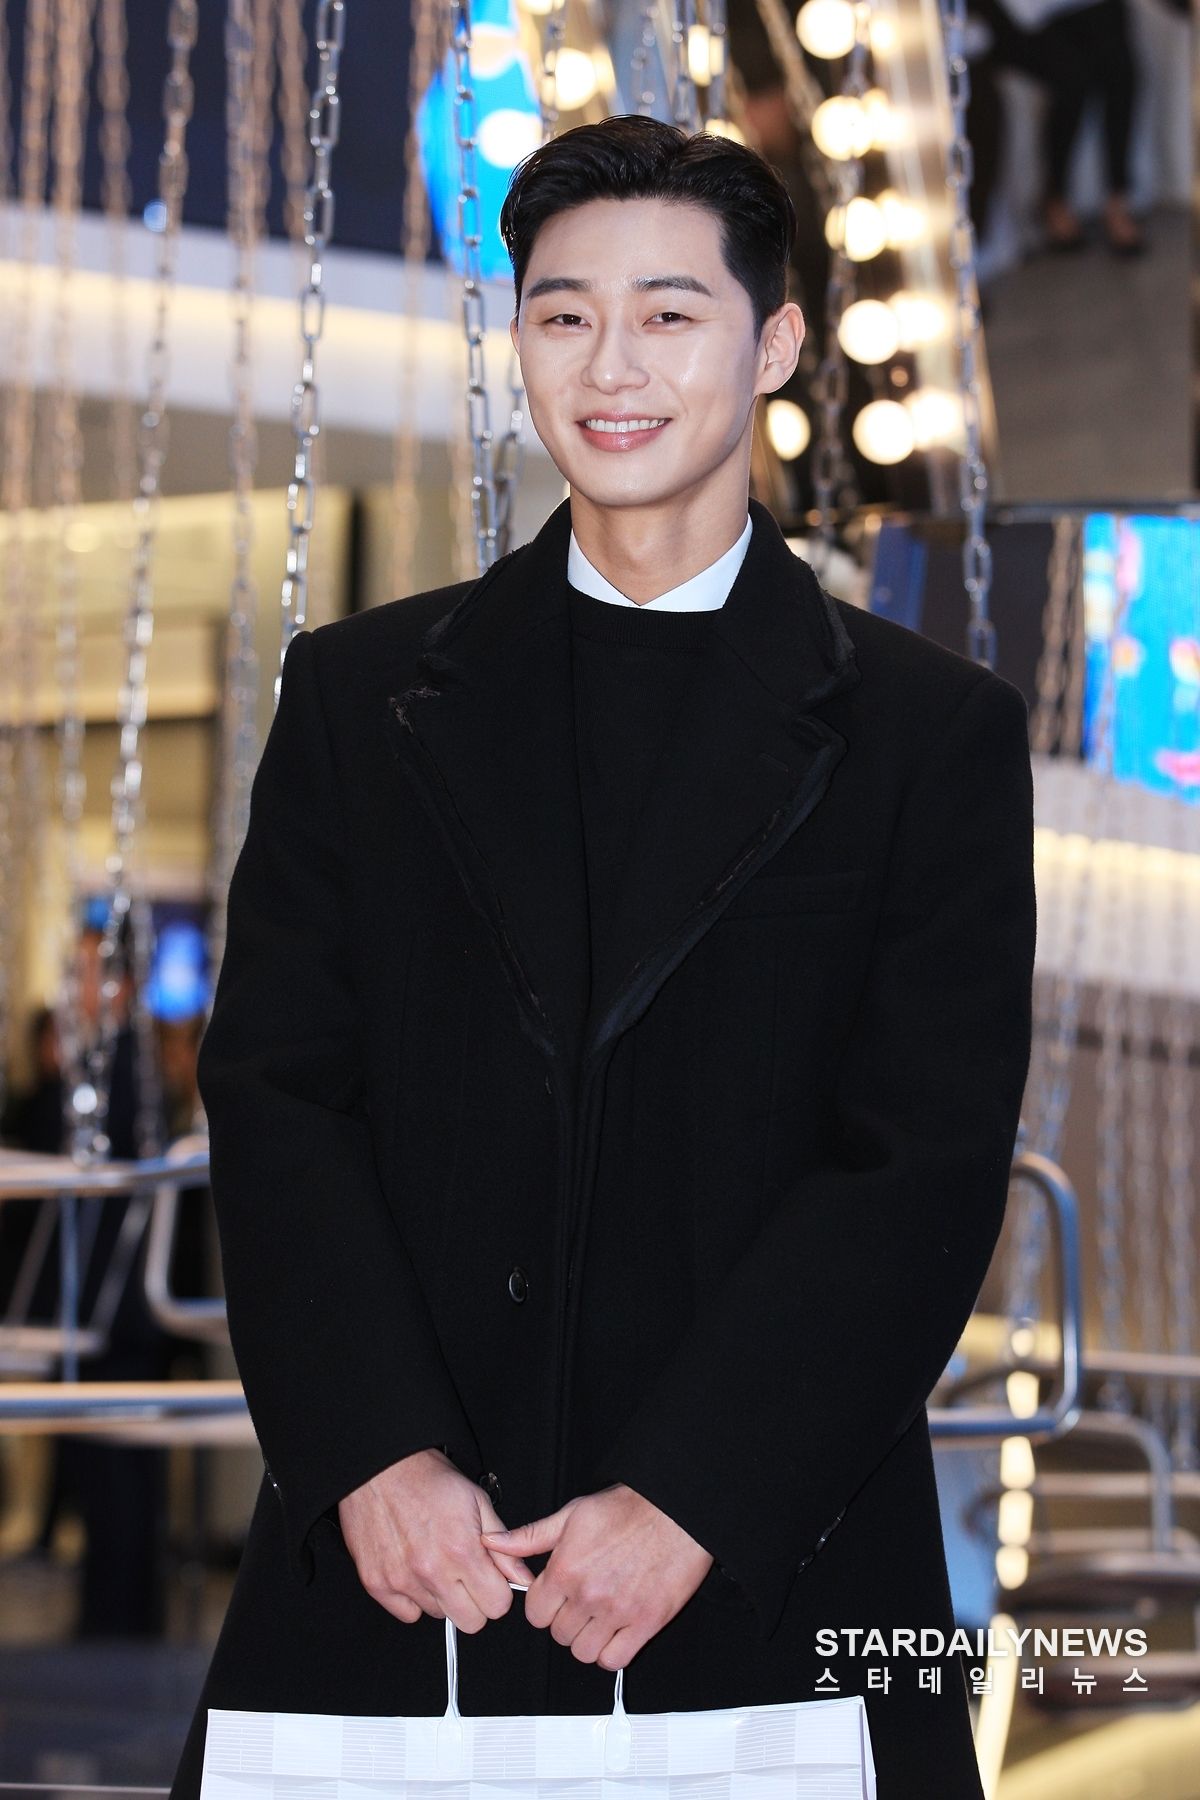 Park Seo Joon Revealed To Have Bought 6-Floor Building Worth 11 Billion